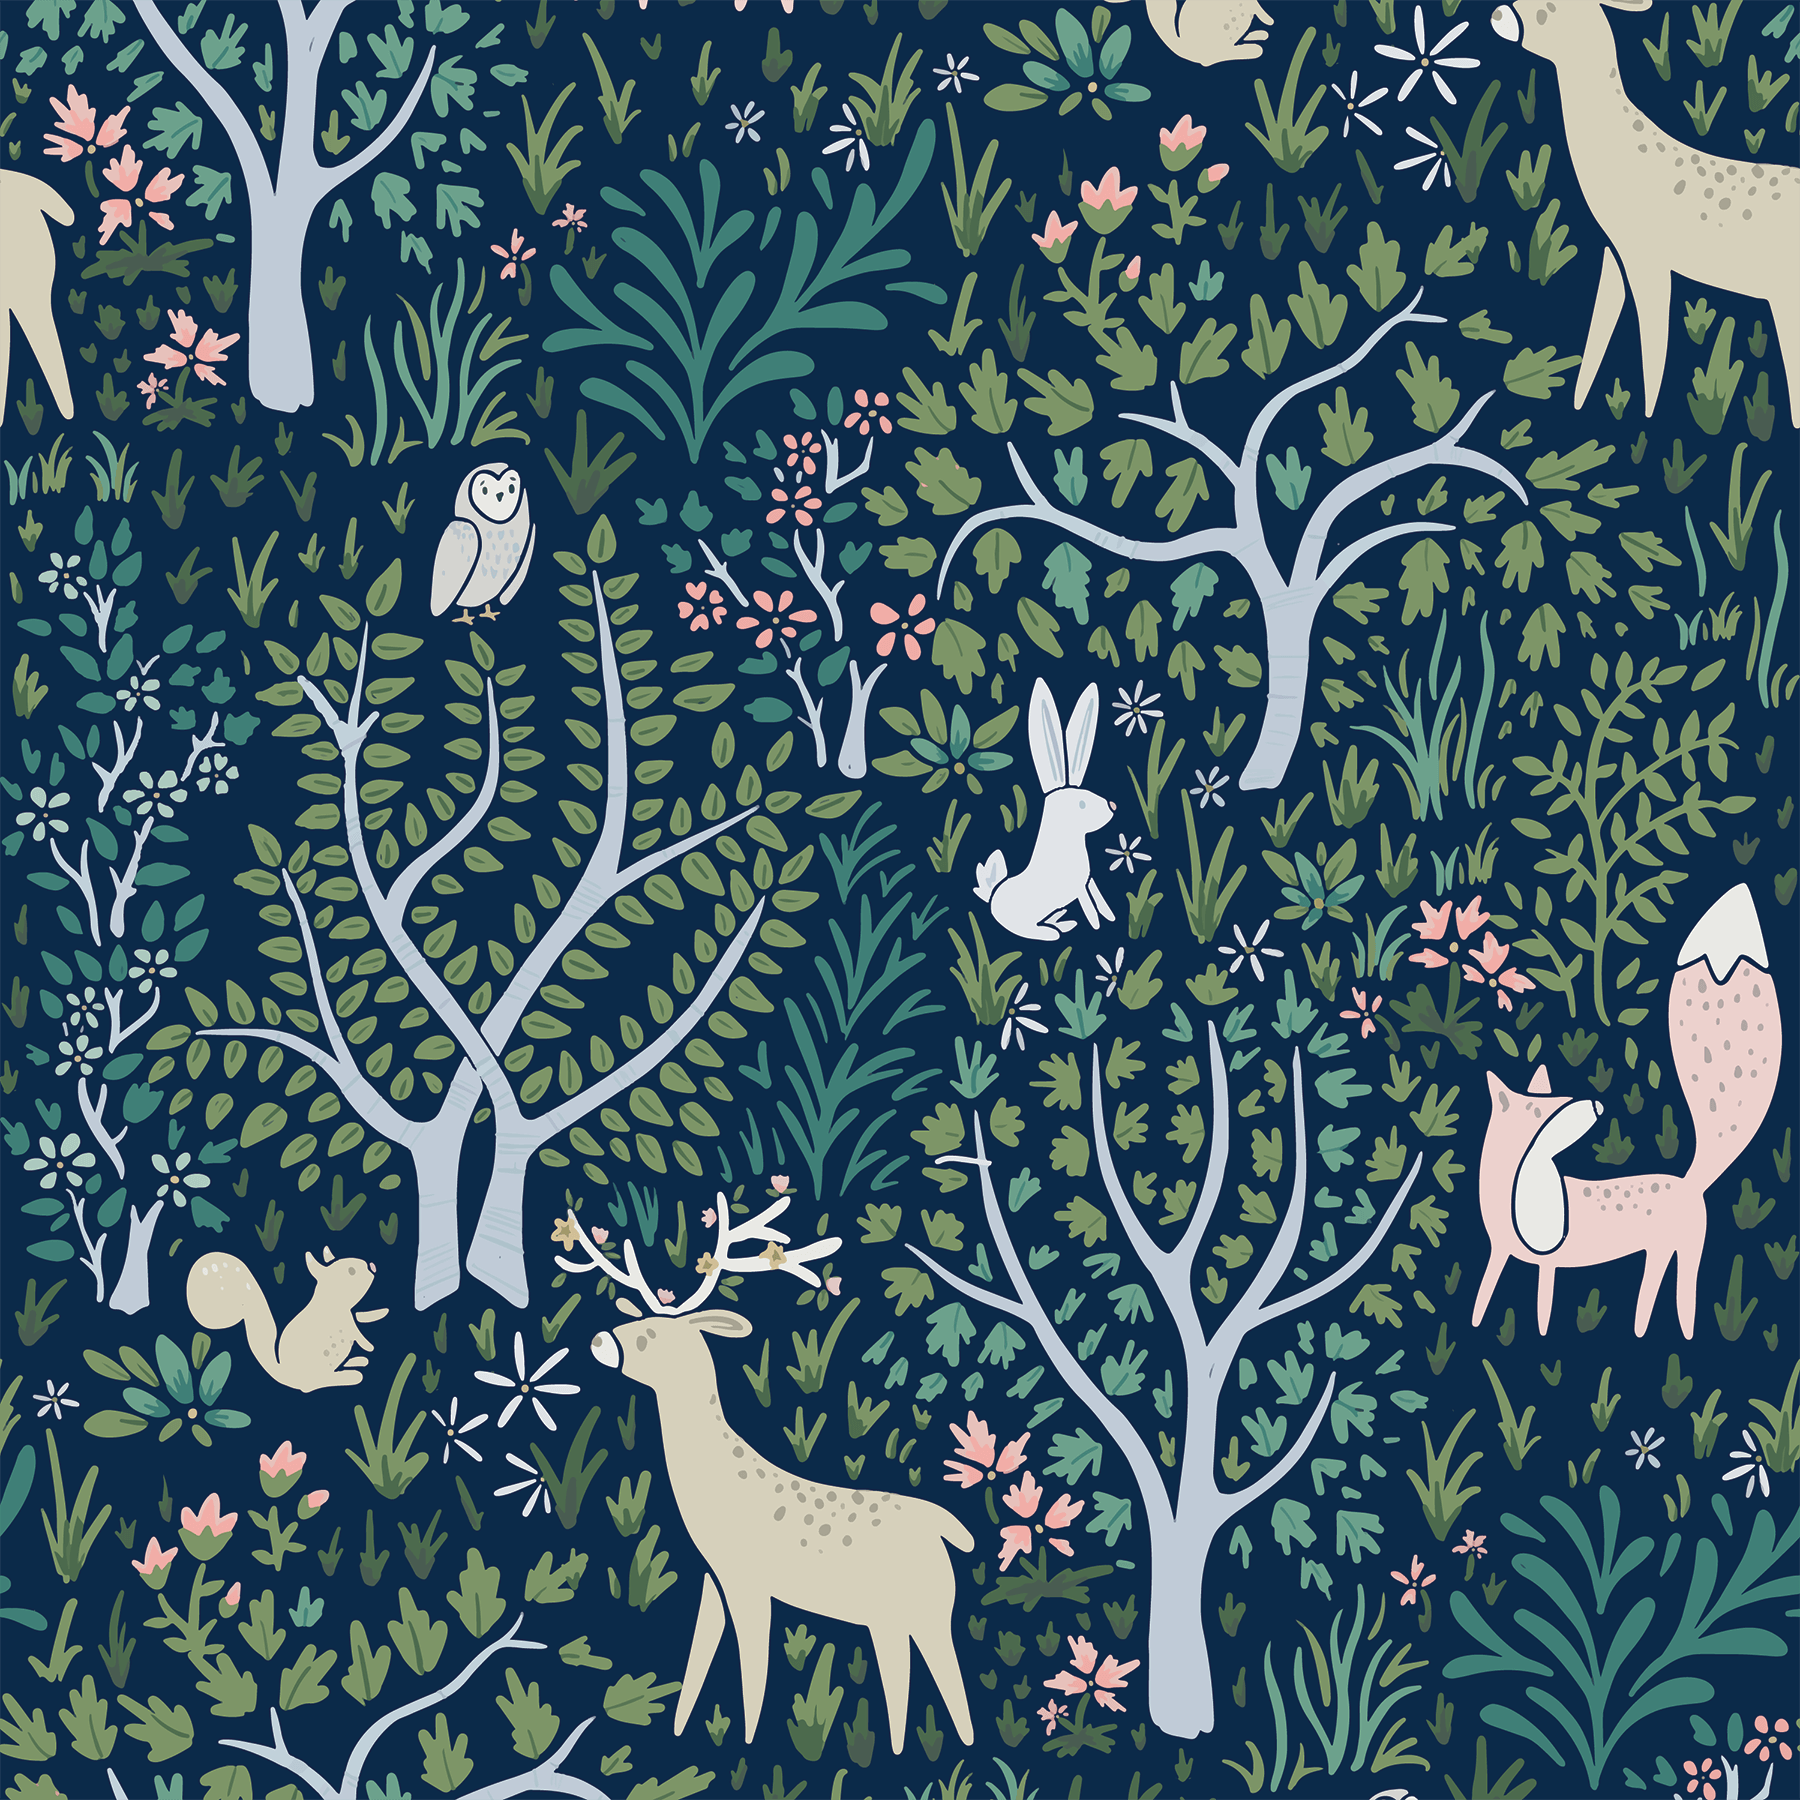 Wallpaper Peel and Stick Wallpaper Woodland Animals Removable  Etsy  Temporary  wallpaper Woodland wallpaper Removable wallpaper